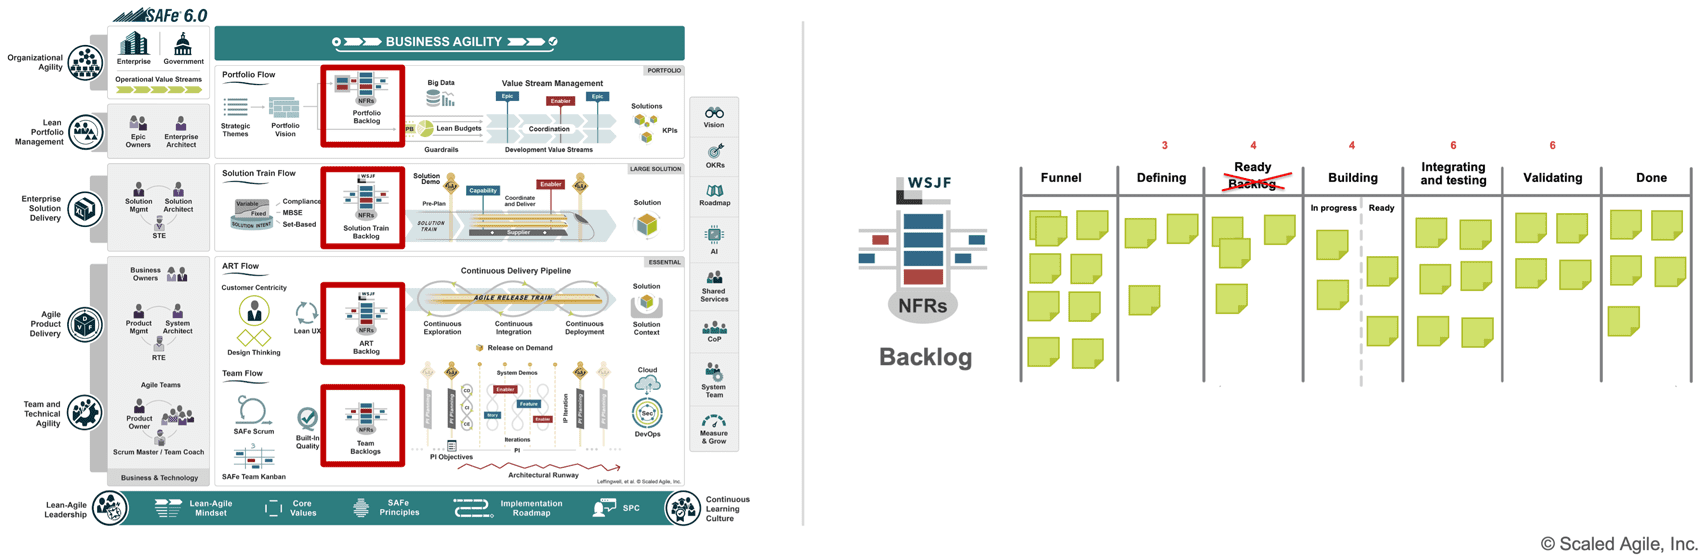 Figure 26. Changes to the Kanban icons and backlog state